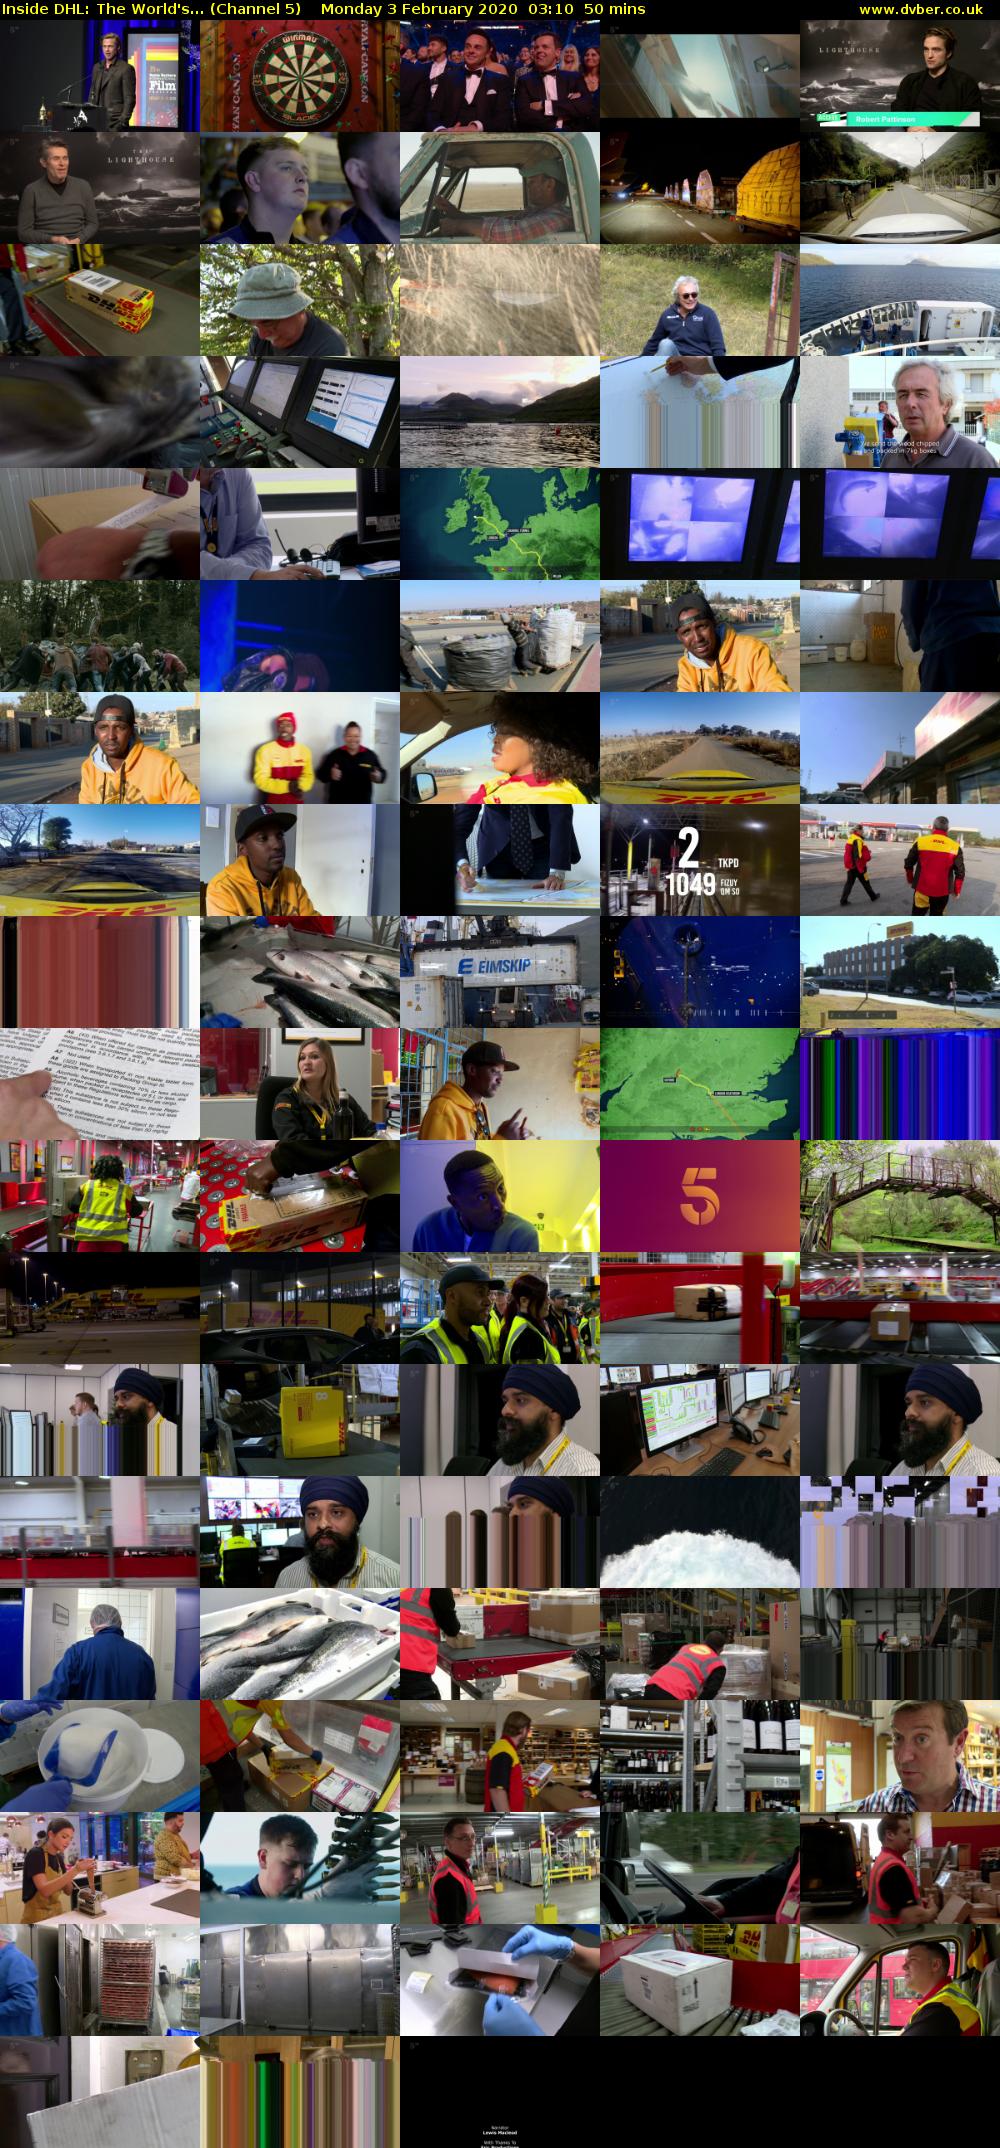 Inside DHL: The World's... (Channel 5) Monday 3 February 2020 03:10 - 04:00